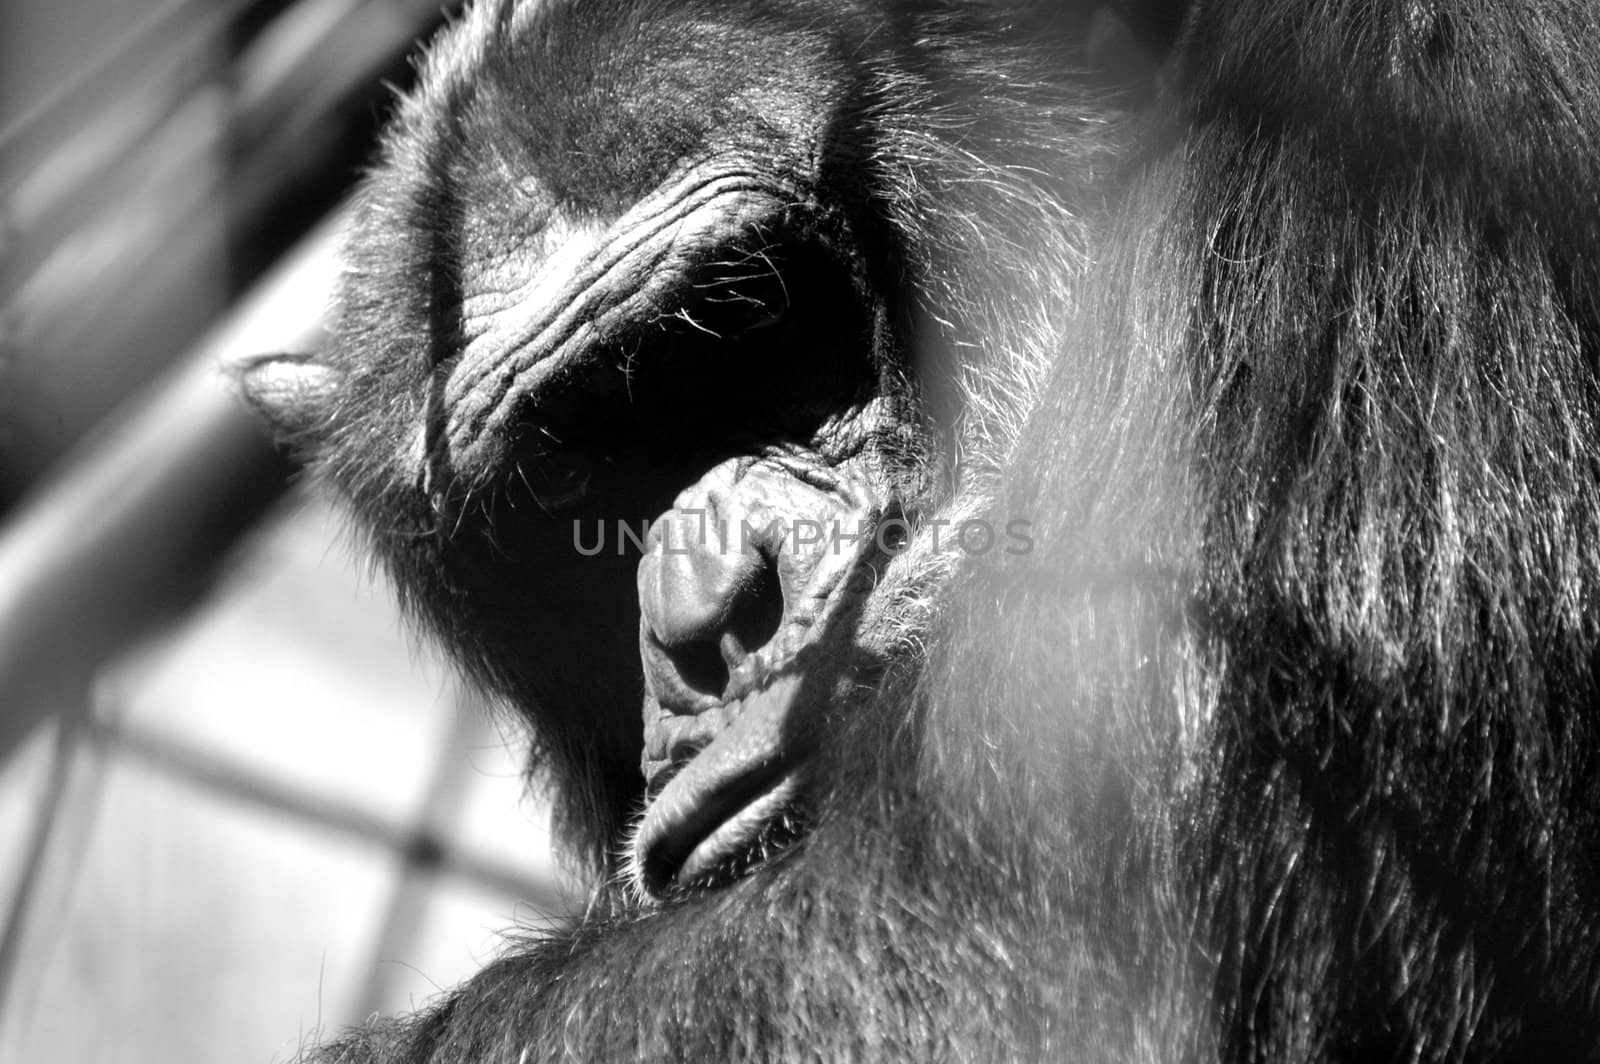 An African monkey in captivity at the zoo